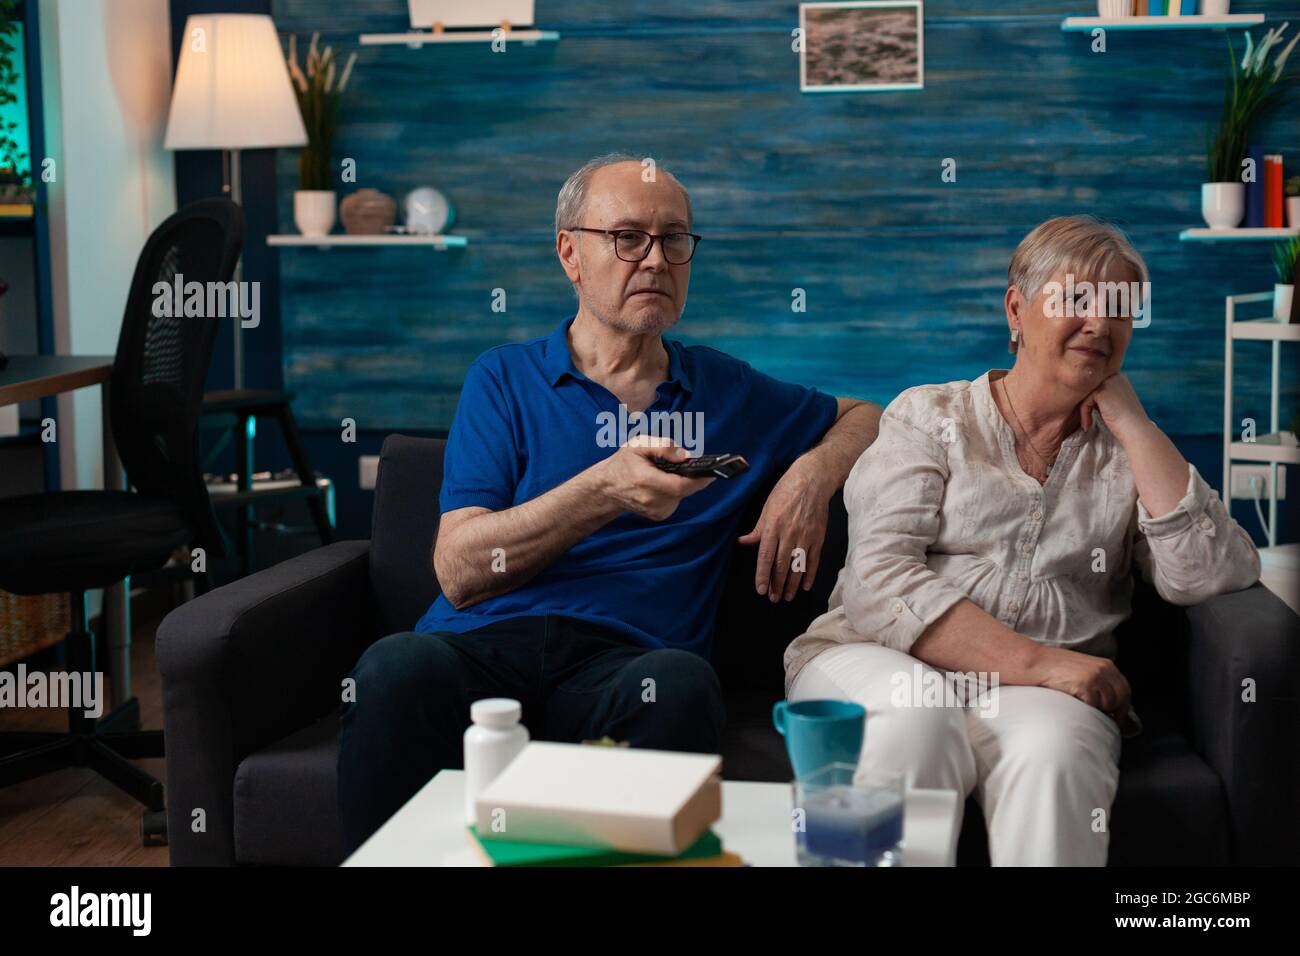 Old couple enjoying retirement at home sitting on sofa watching television. Senior people having fun together with tv movie technology for relaxation entertainment being indoors Stock Photo